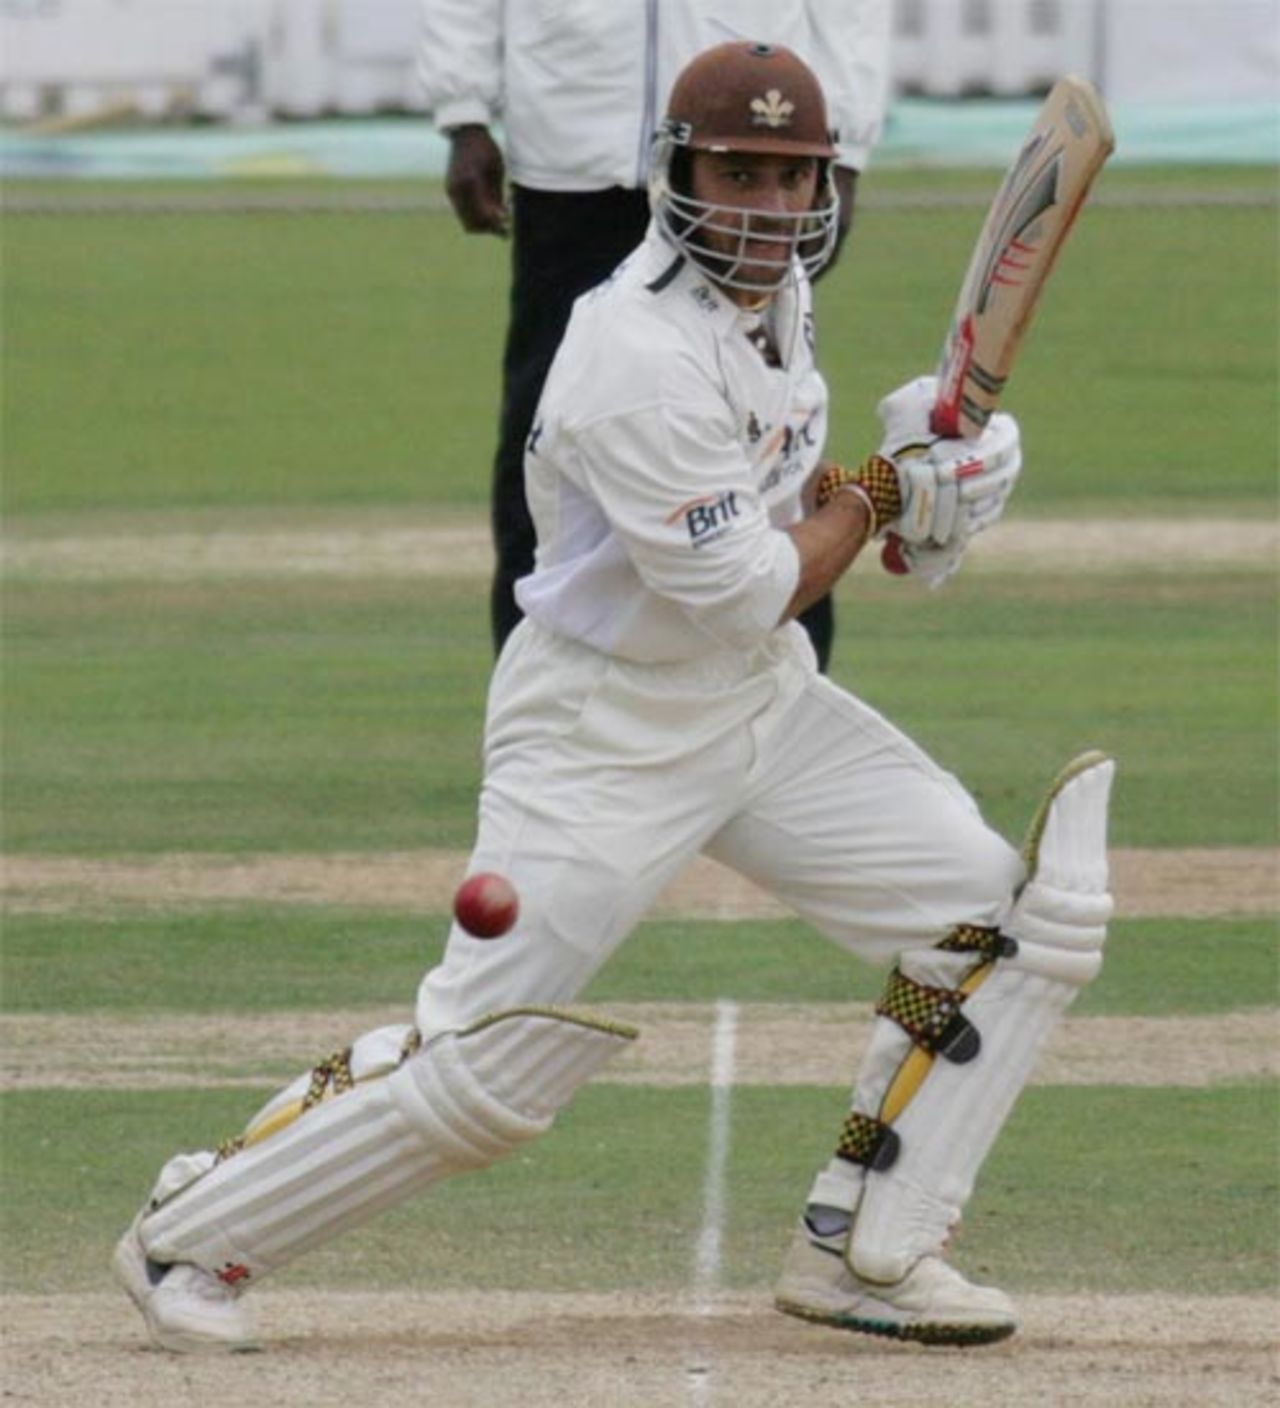 Mark Ramprakash on the attack on his way to his seventh hundred of the summer, Surrey v Lancashire, The Oval, September 21, 2997